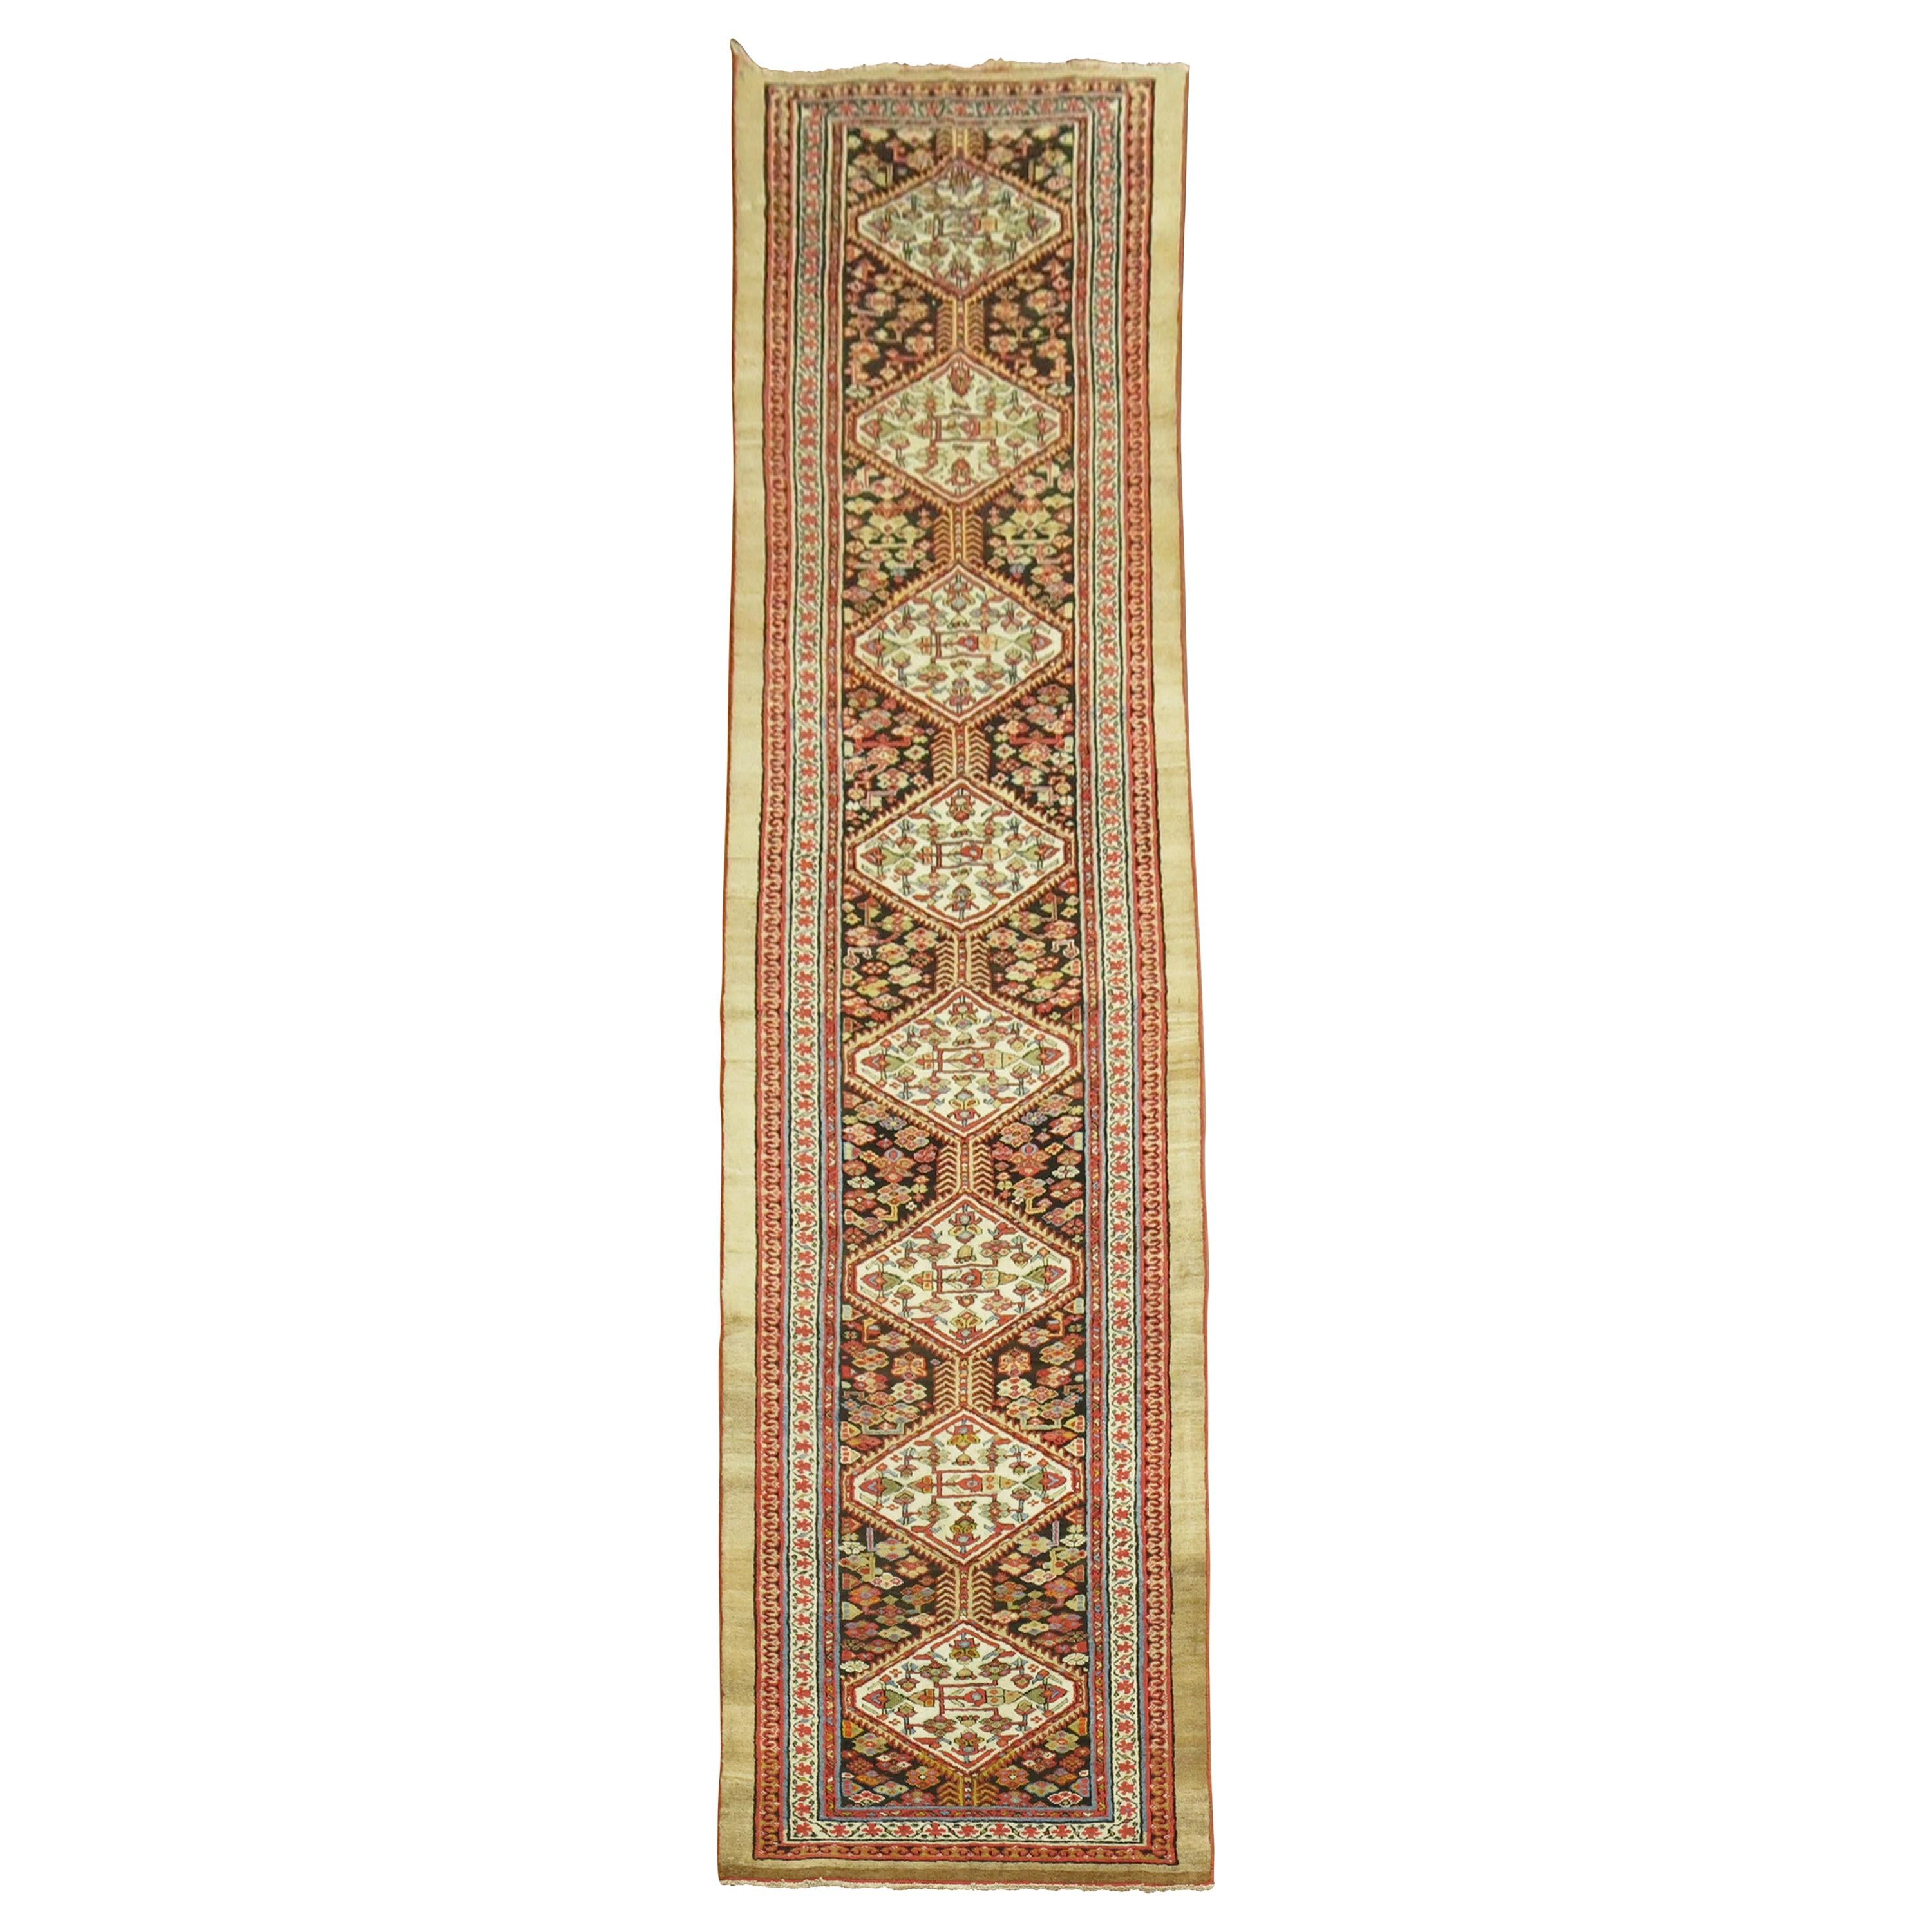 Early 20th Century Antique Tribal Persian Serab Traditional Runner